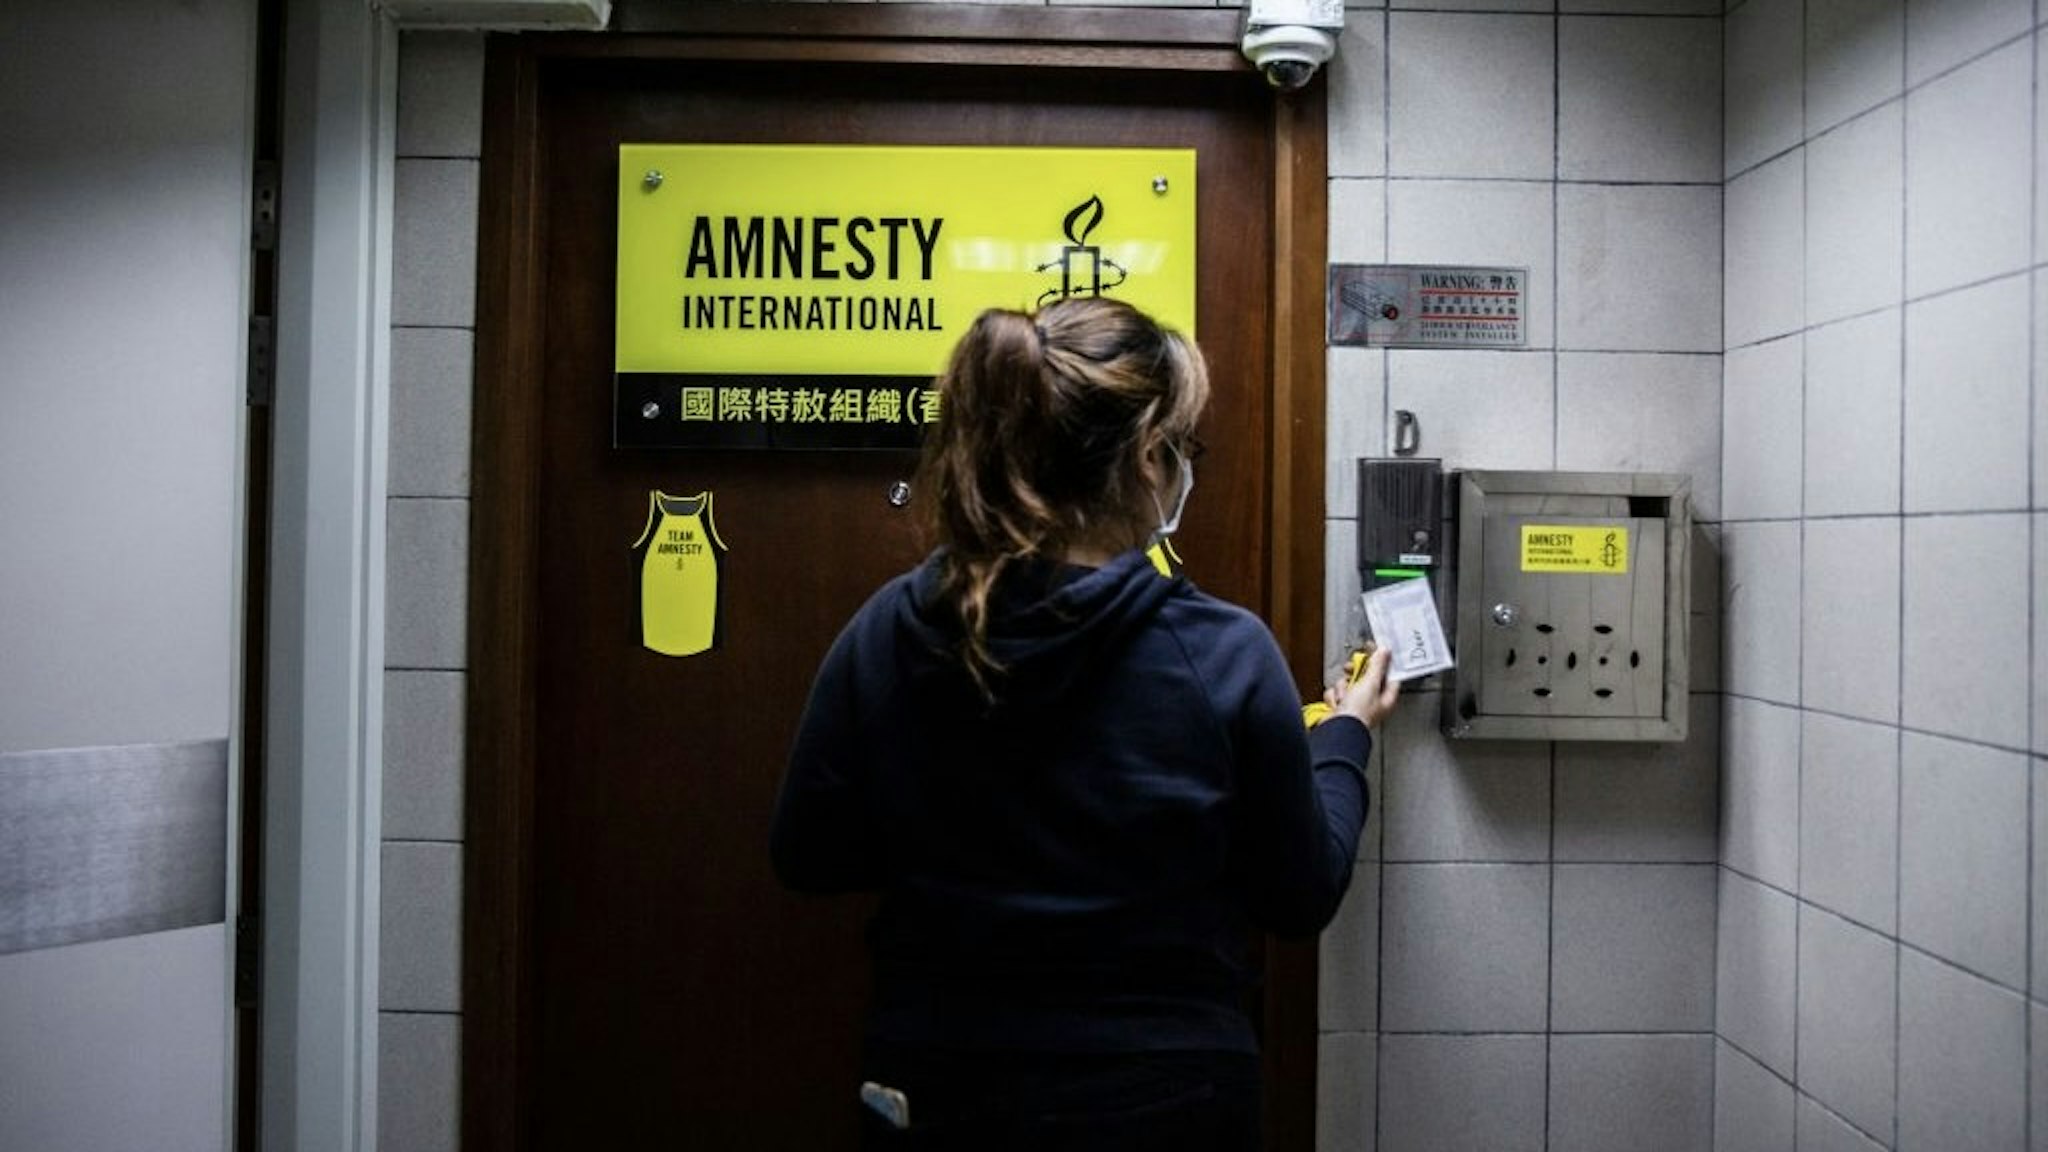 HONG KONG-CHINA-POLITICS-RIGHTS-AMNESTY A woman is seen at the entrance to Amnesty International offices in Hong Kong on October, 2021, as the Human Rights organisation announces it will be closing its offices by the end of 2021 citing Beijings enacted national security law as a reason. (Photo by ISAAC LAWRENCE / AFP) (Photo by ISAAC LAWRENCE/AFP via Getty Images) ISAAC LAWRENCE / Contributor